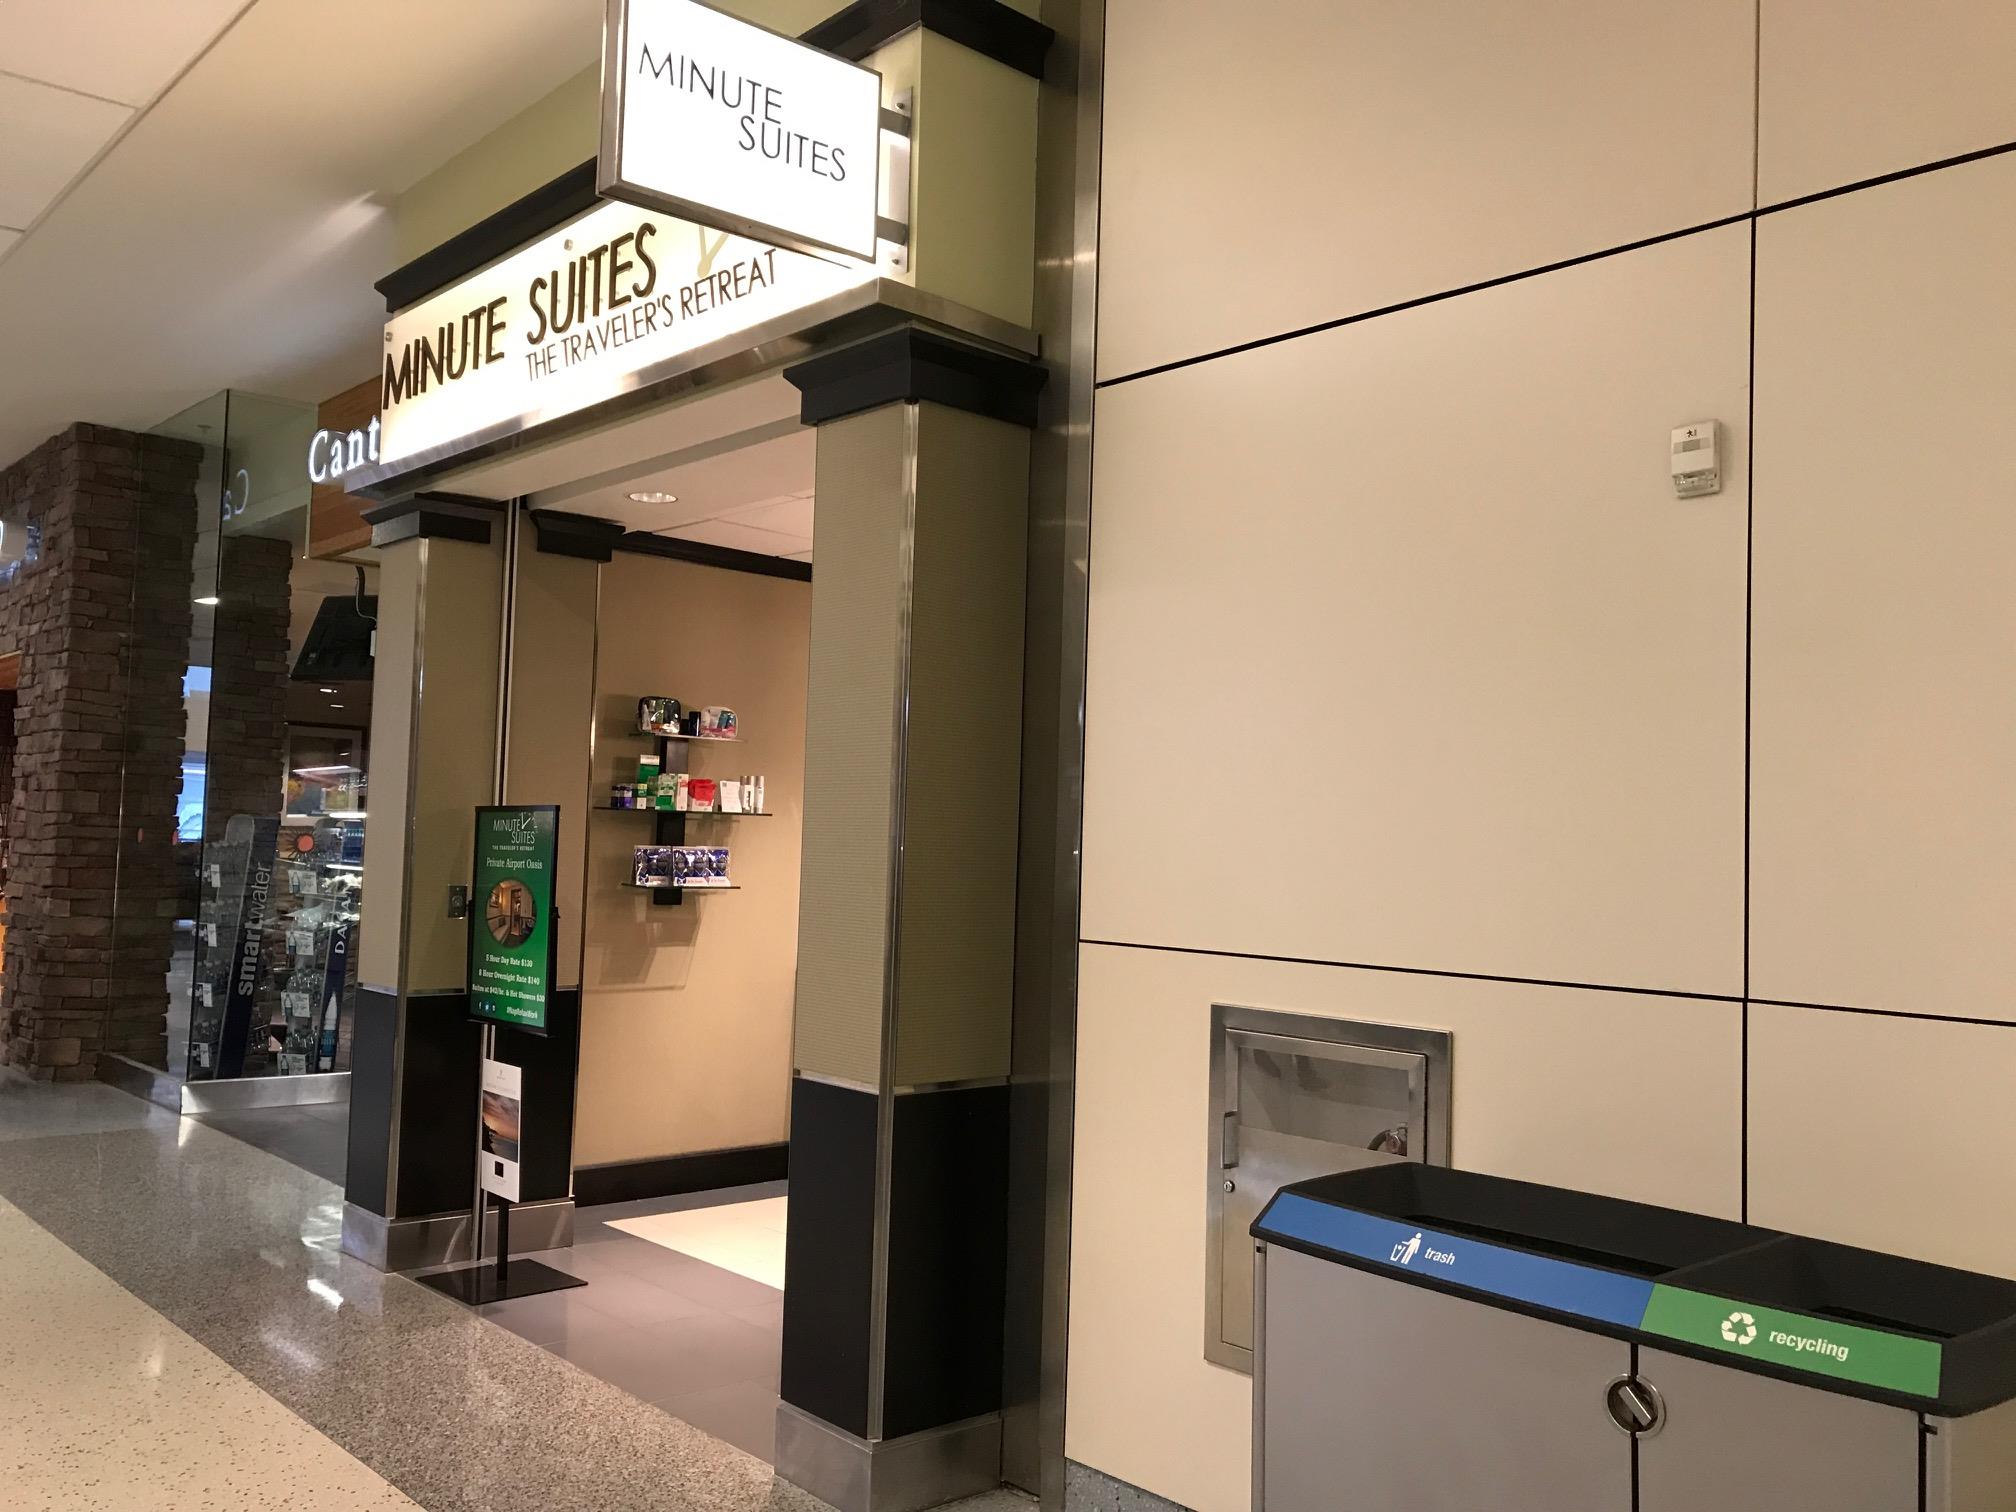 Minute Suites: The Solution to a Long Layover?